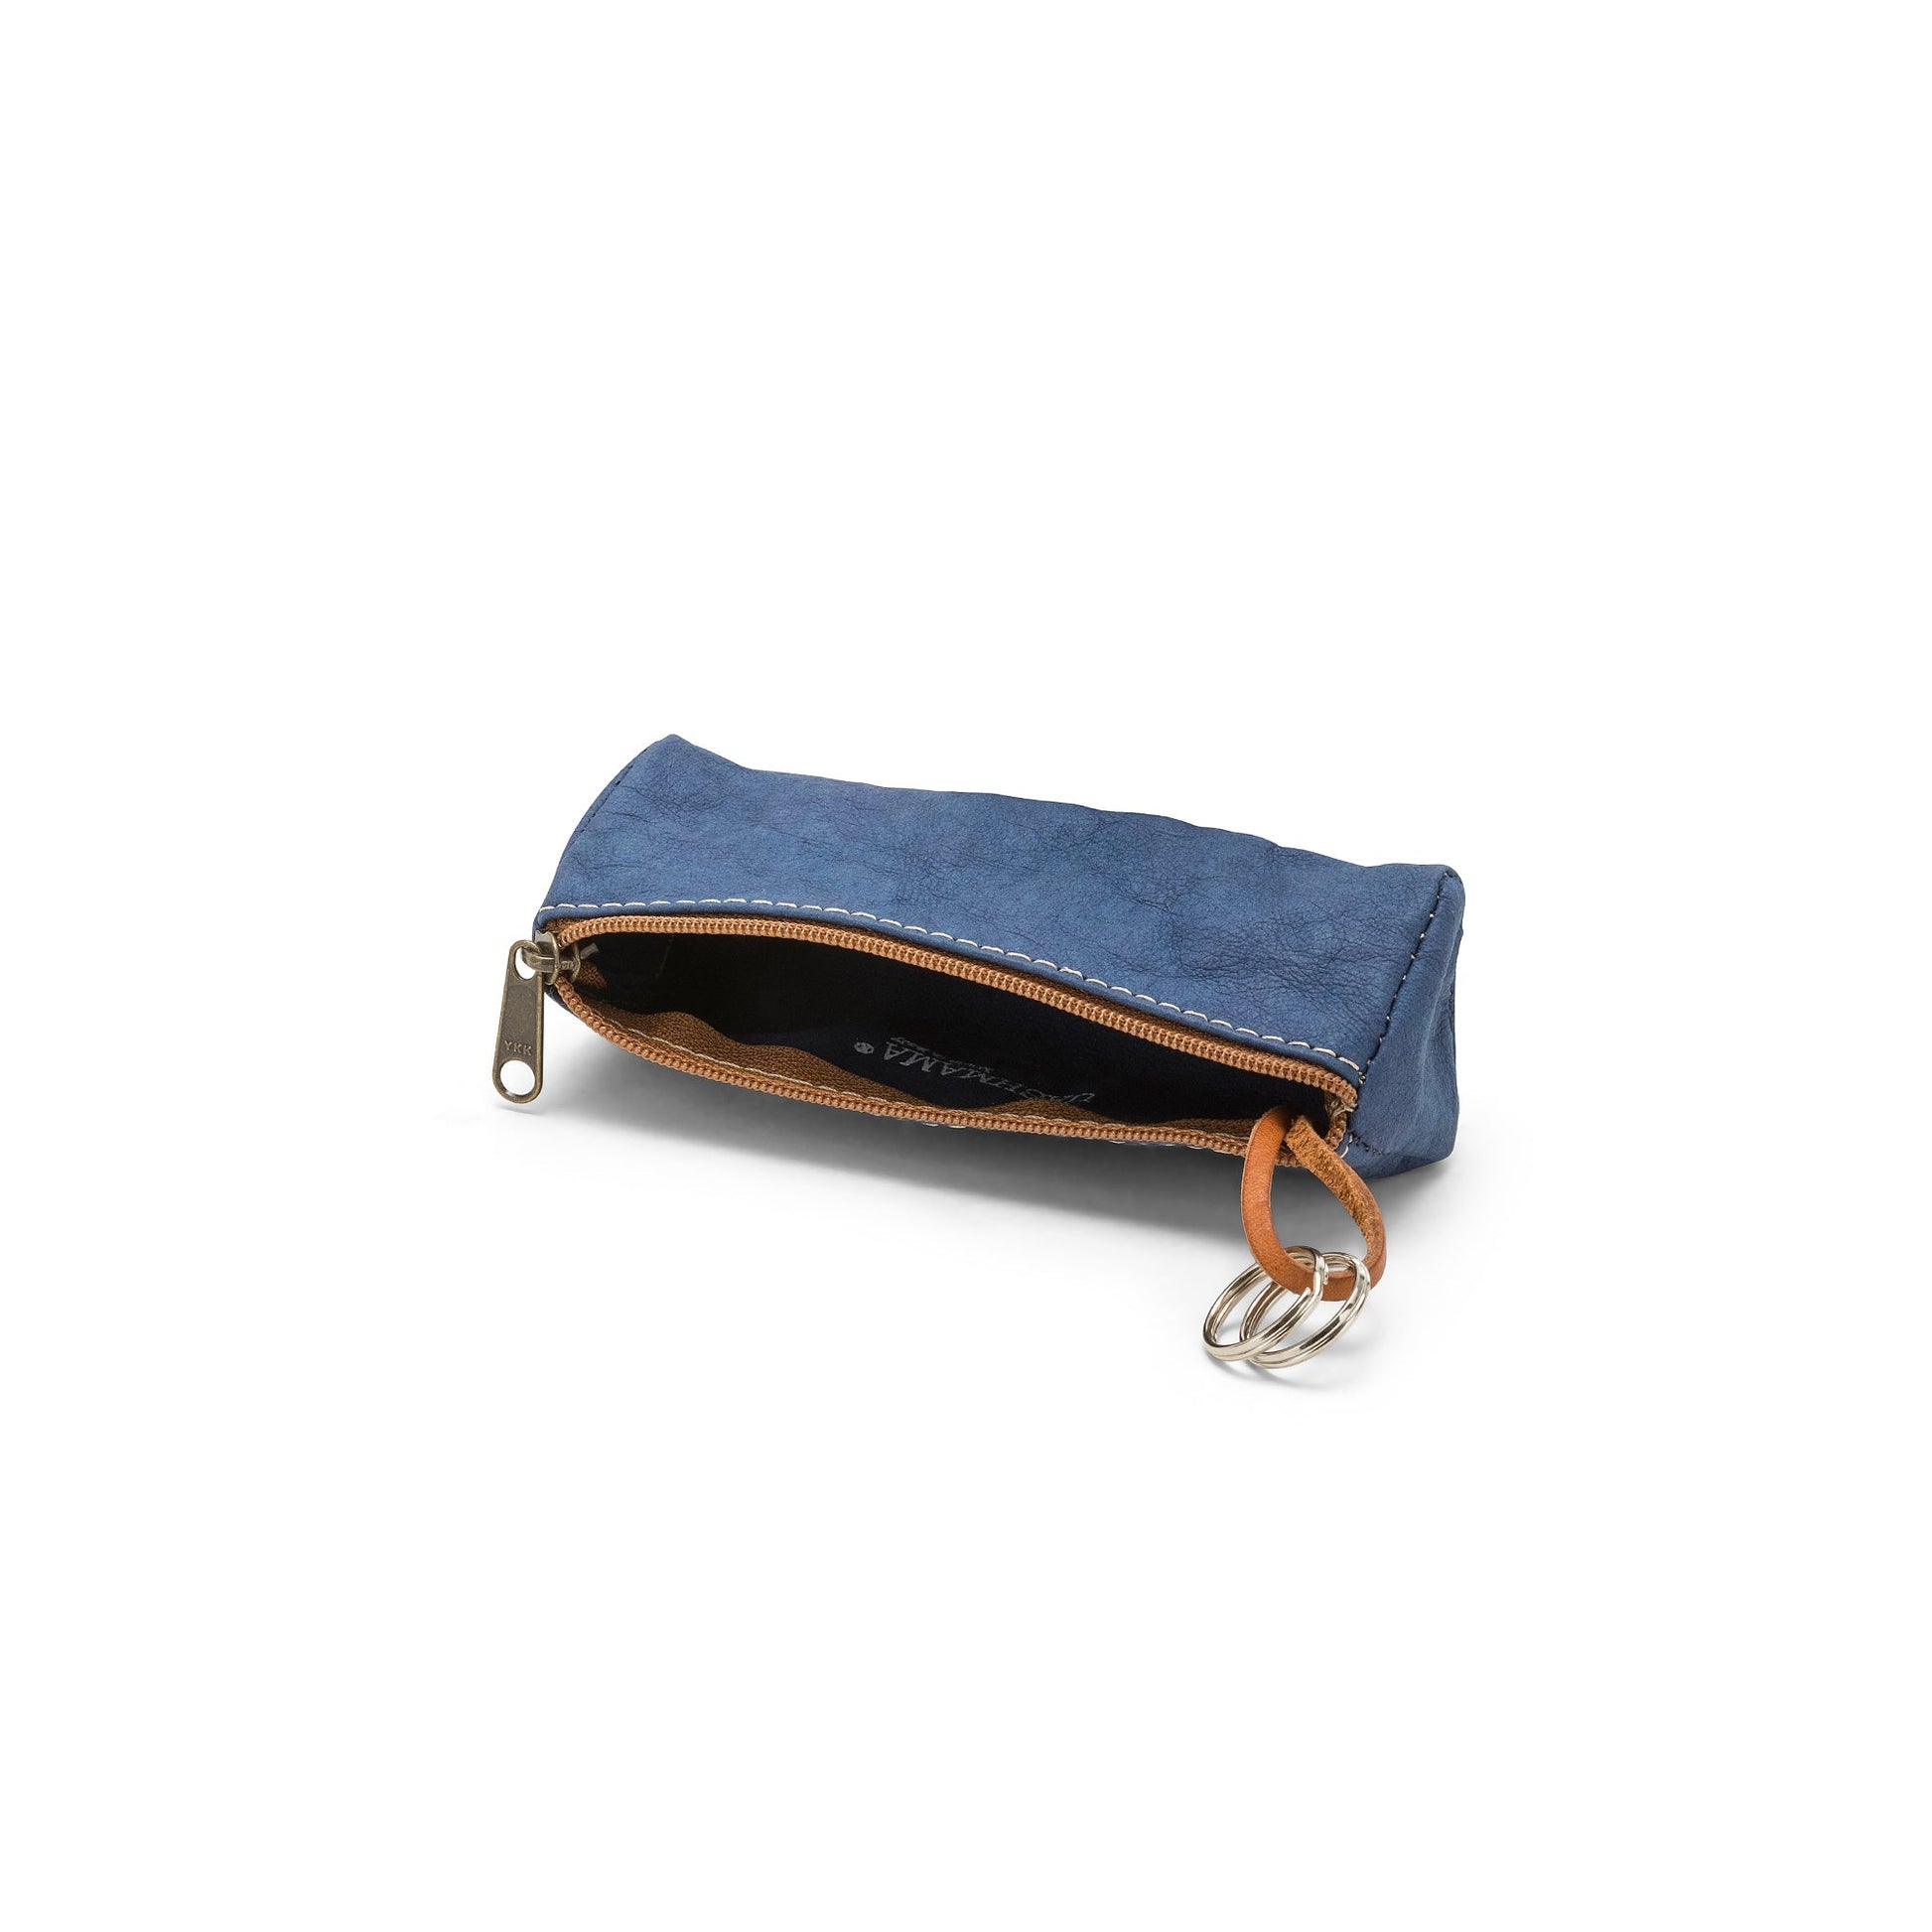 A blue washable paper key holder is shown on its side, unzipped. A keyring attachment is shown on a washable paper loop from the inside.